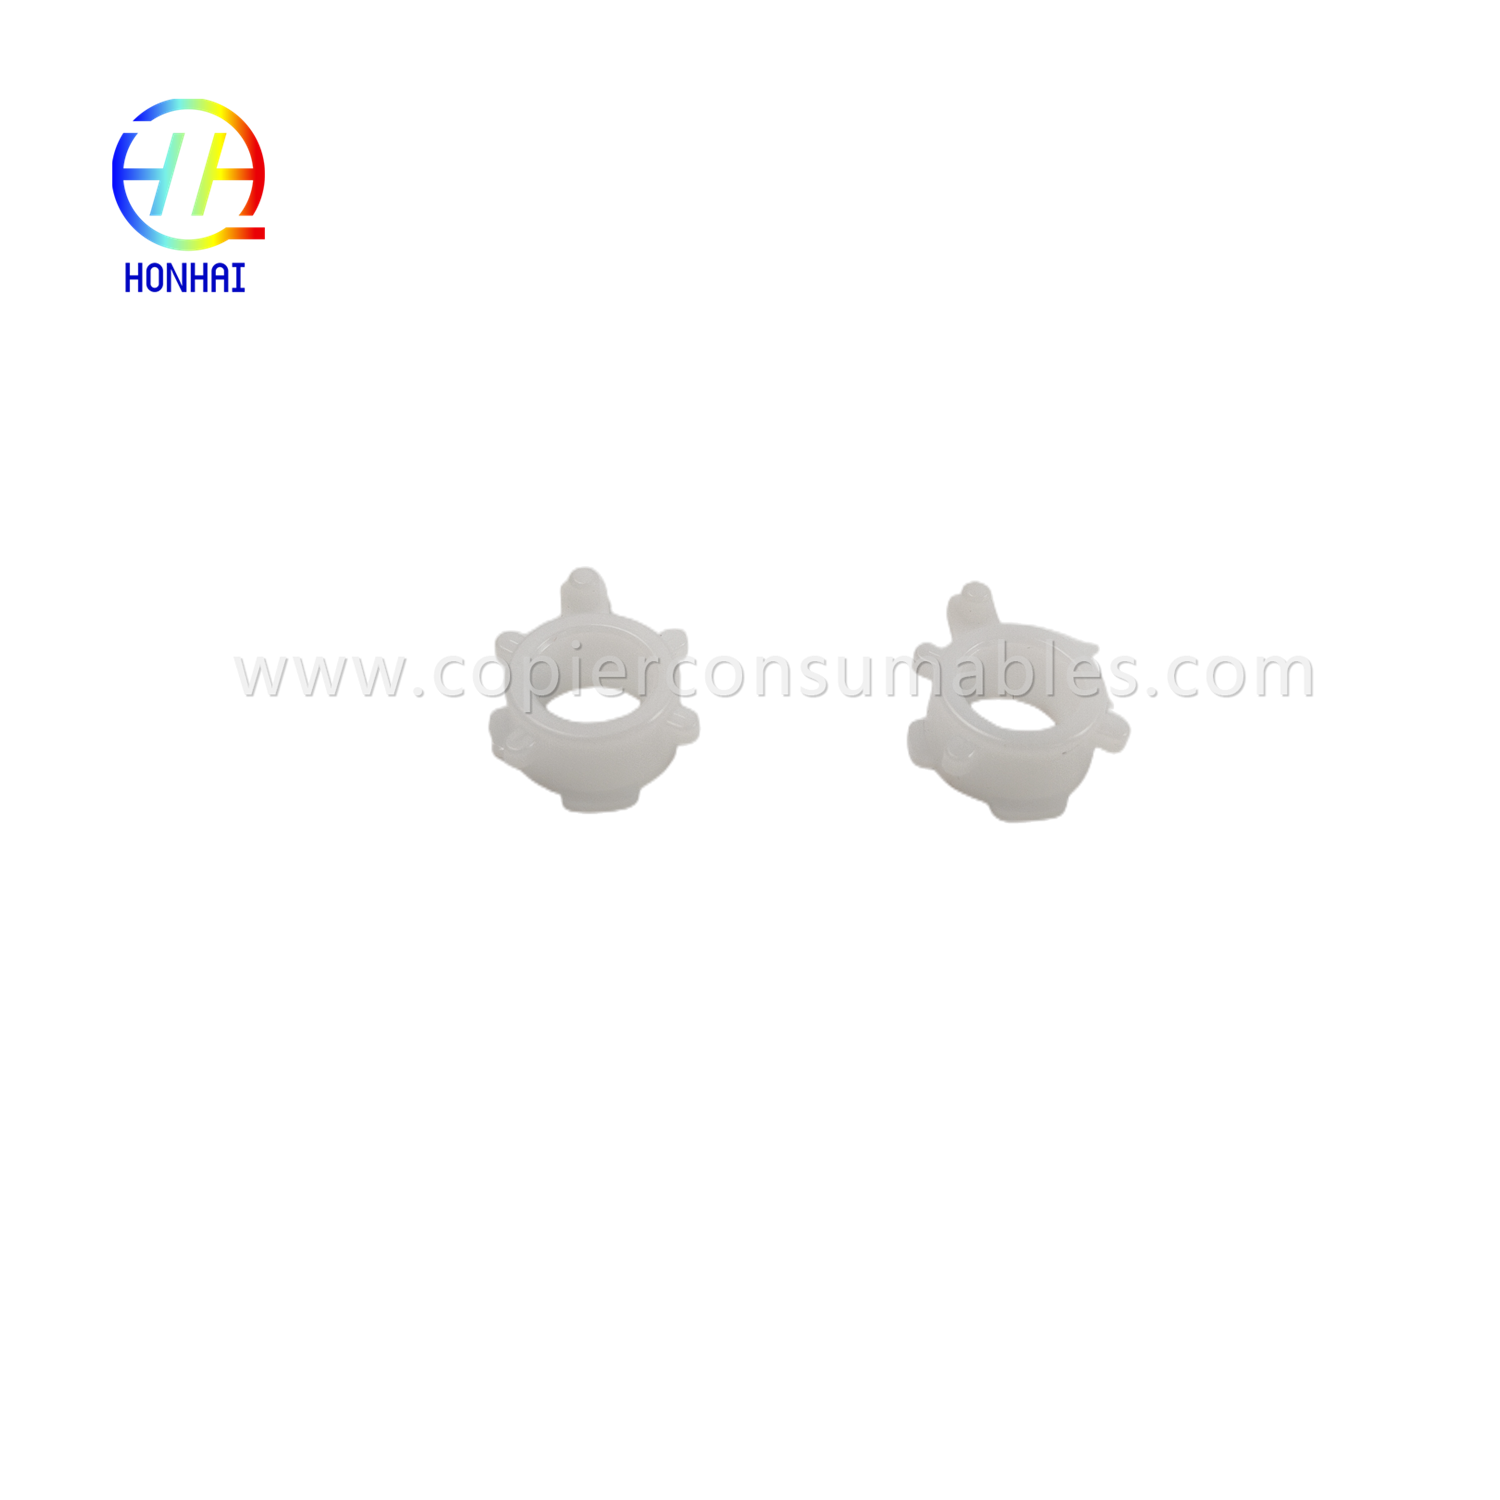 https://c585.goodao.net/delivery-roller-tuleje-for-hp-2035-2055-2015-1320-rc2-6237-000-rl2-6229-oem-product/